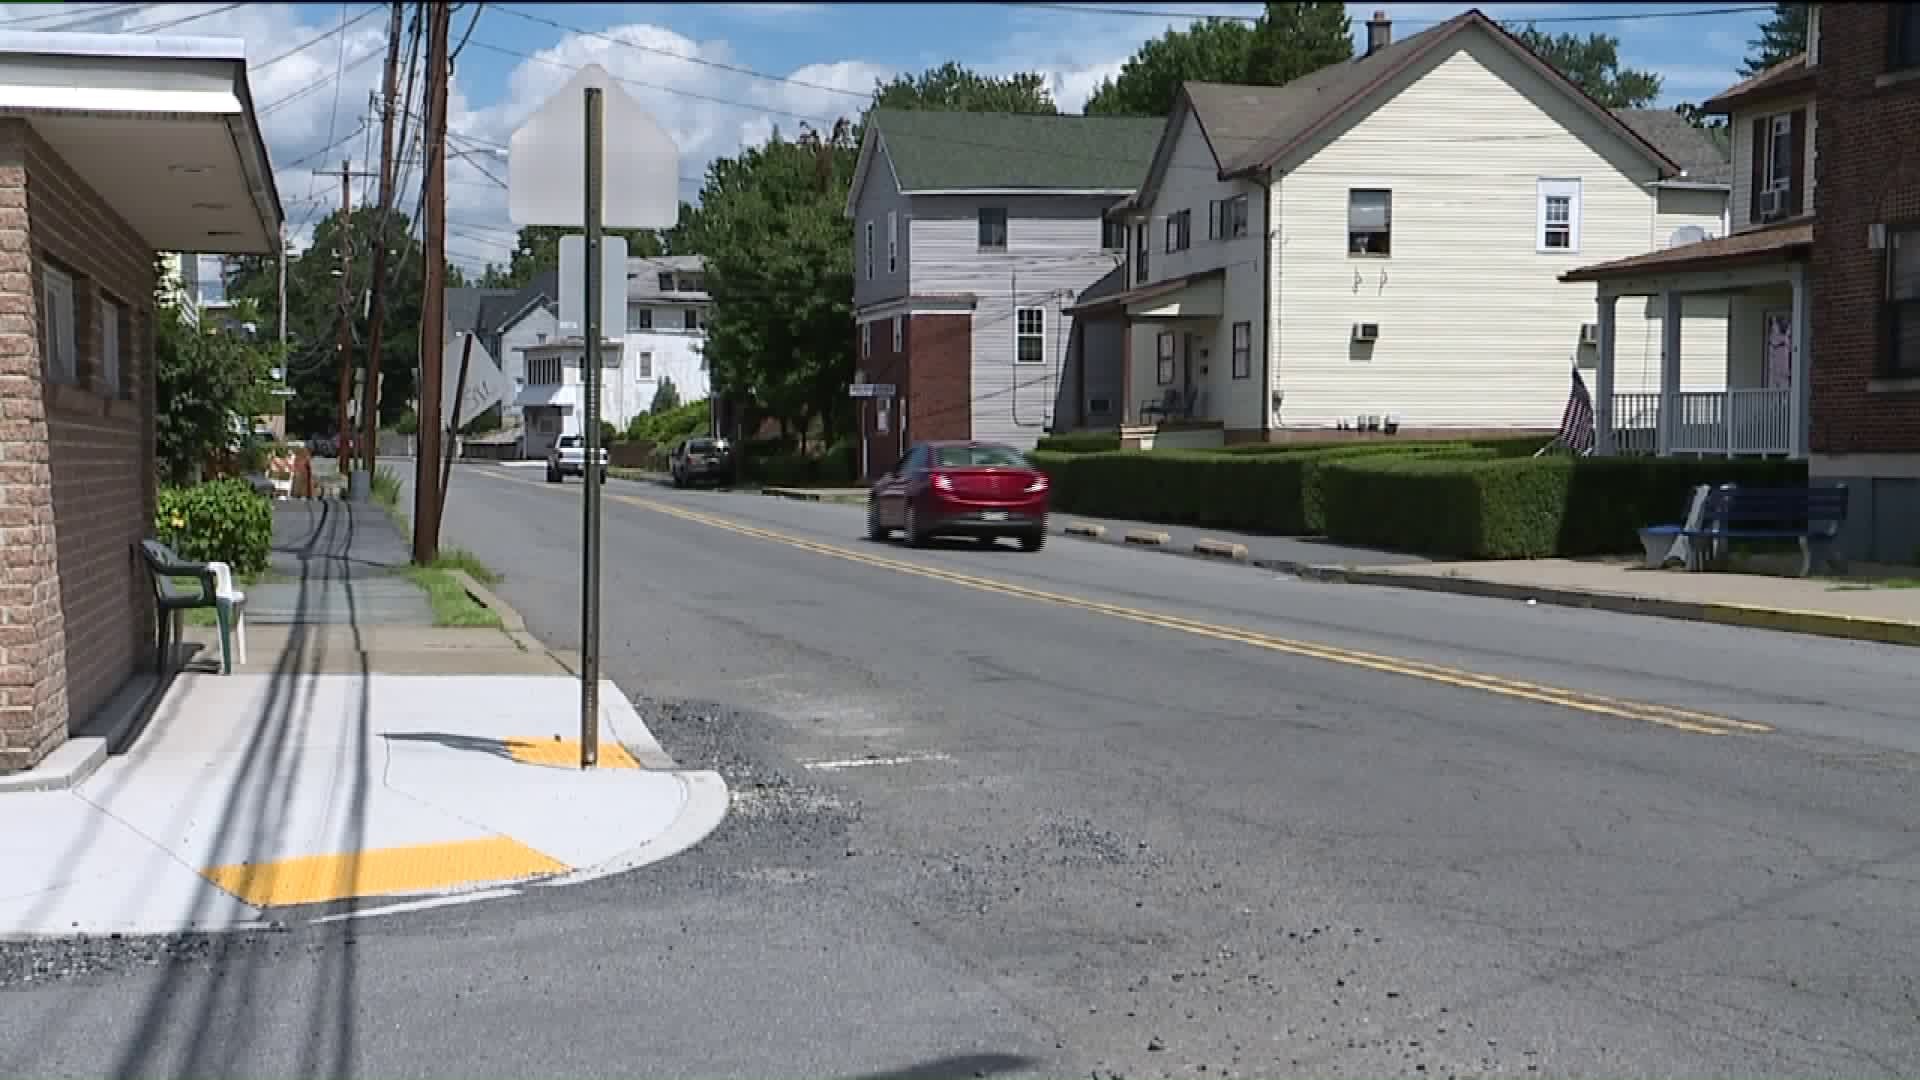 Paving Project to Begin in Avoca